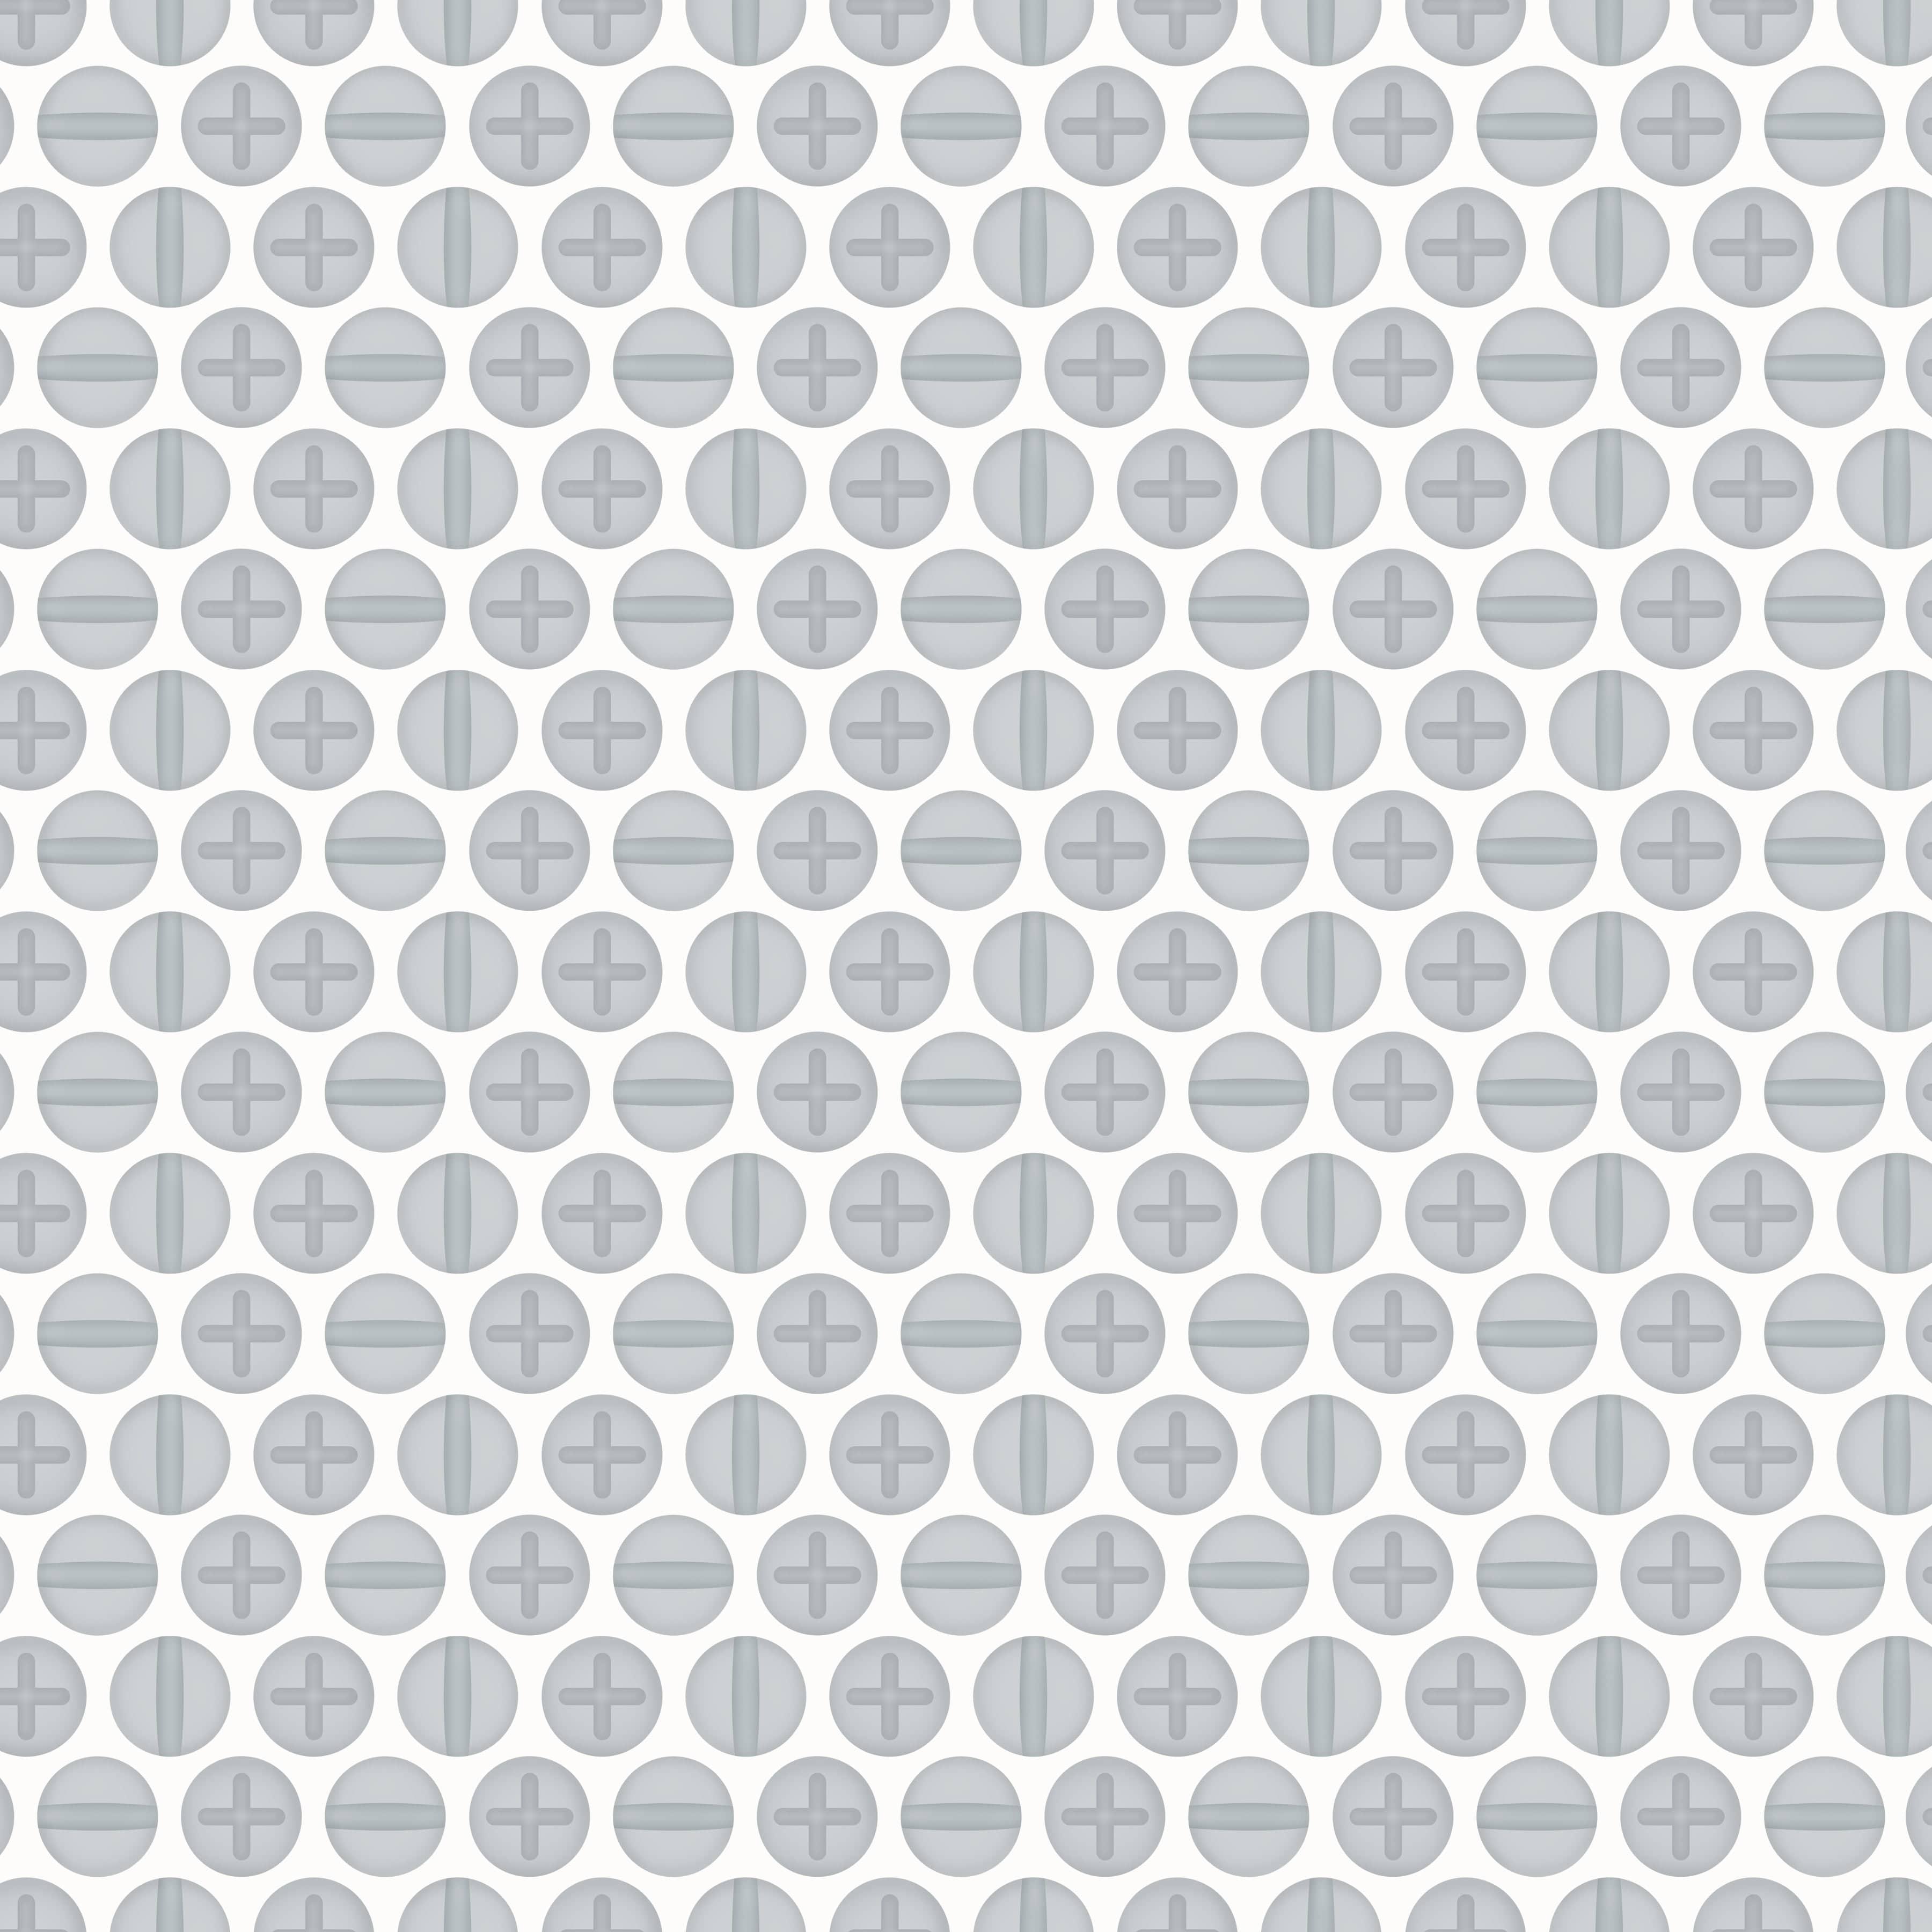 Toolbox Time Collection Screwdrivers 12 x 12 Double-Sided Scrapbook Paper by SSC Designs - Scrapbook Supply Companies